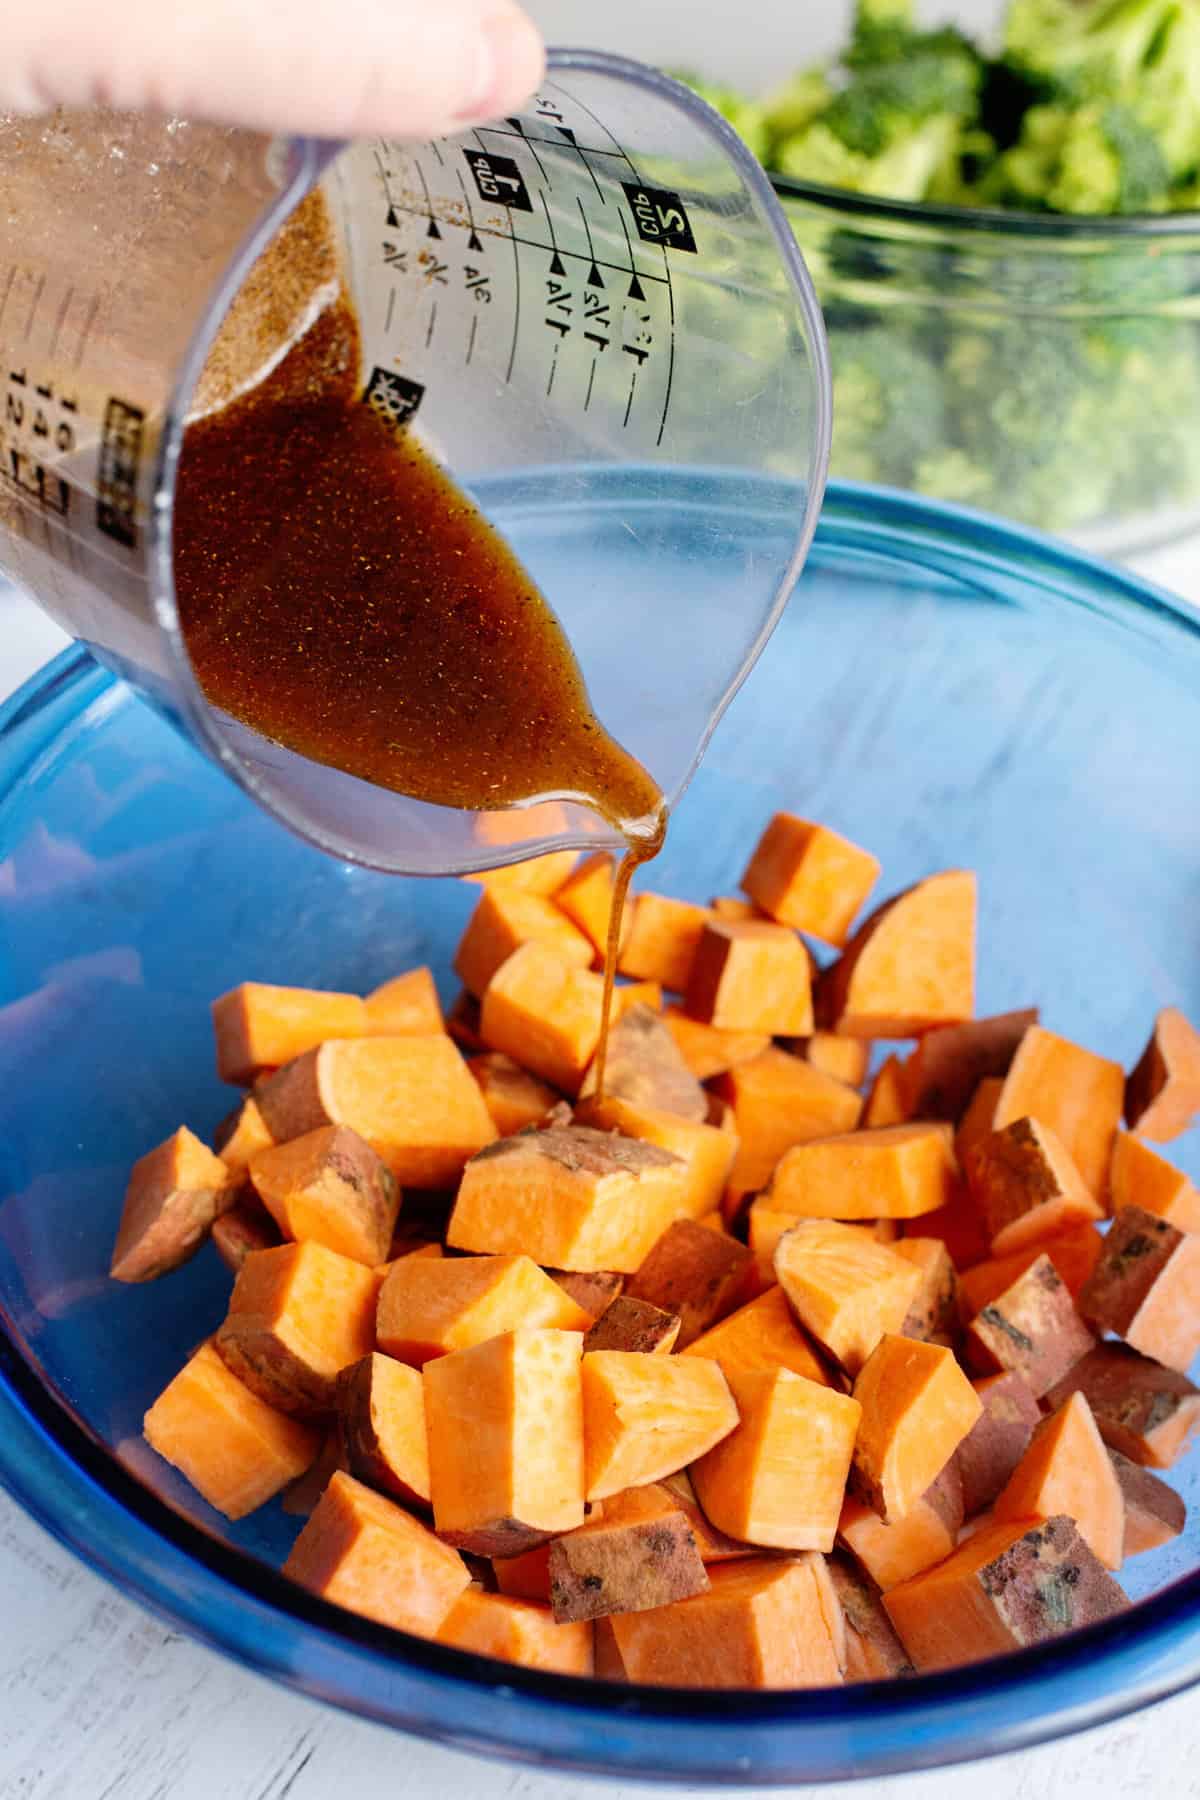 coat sweet potatoes with half the whisked mixture